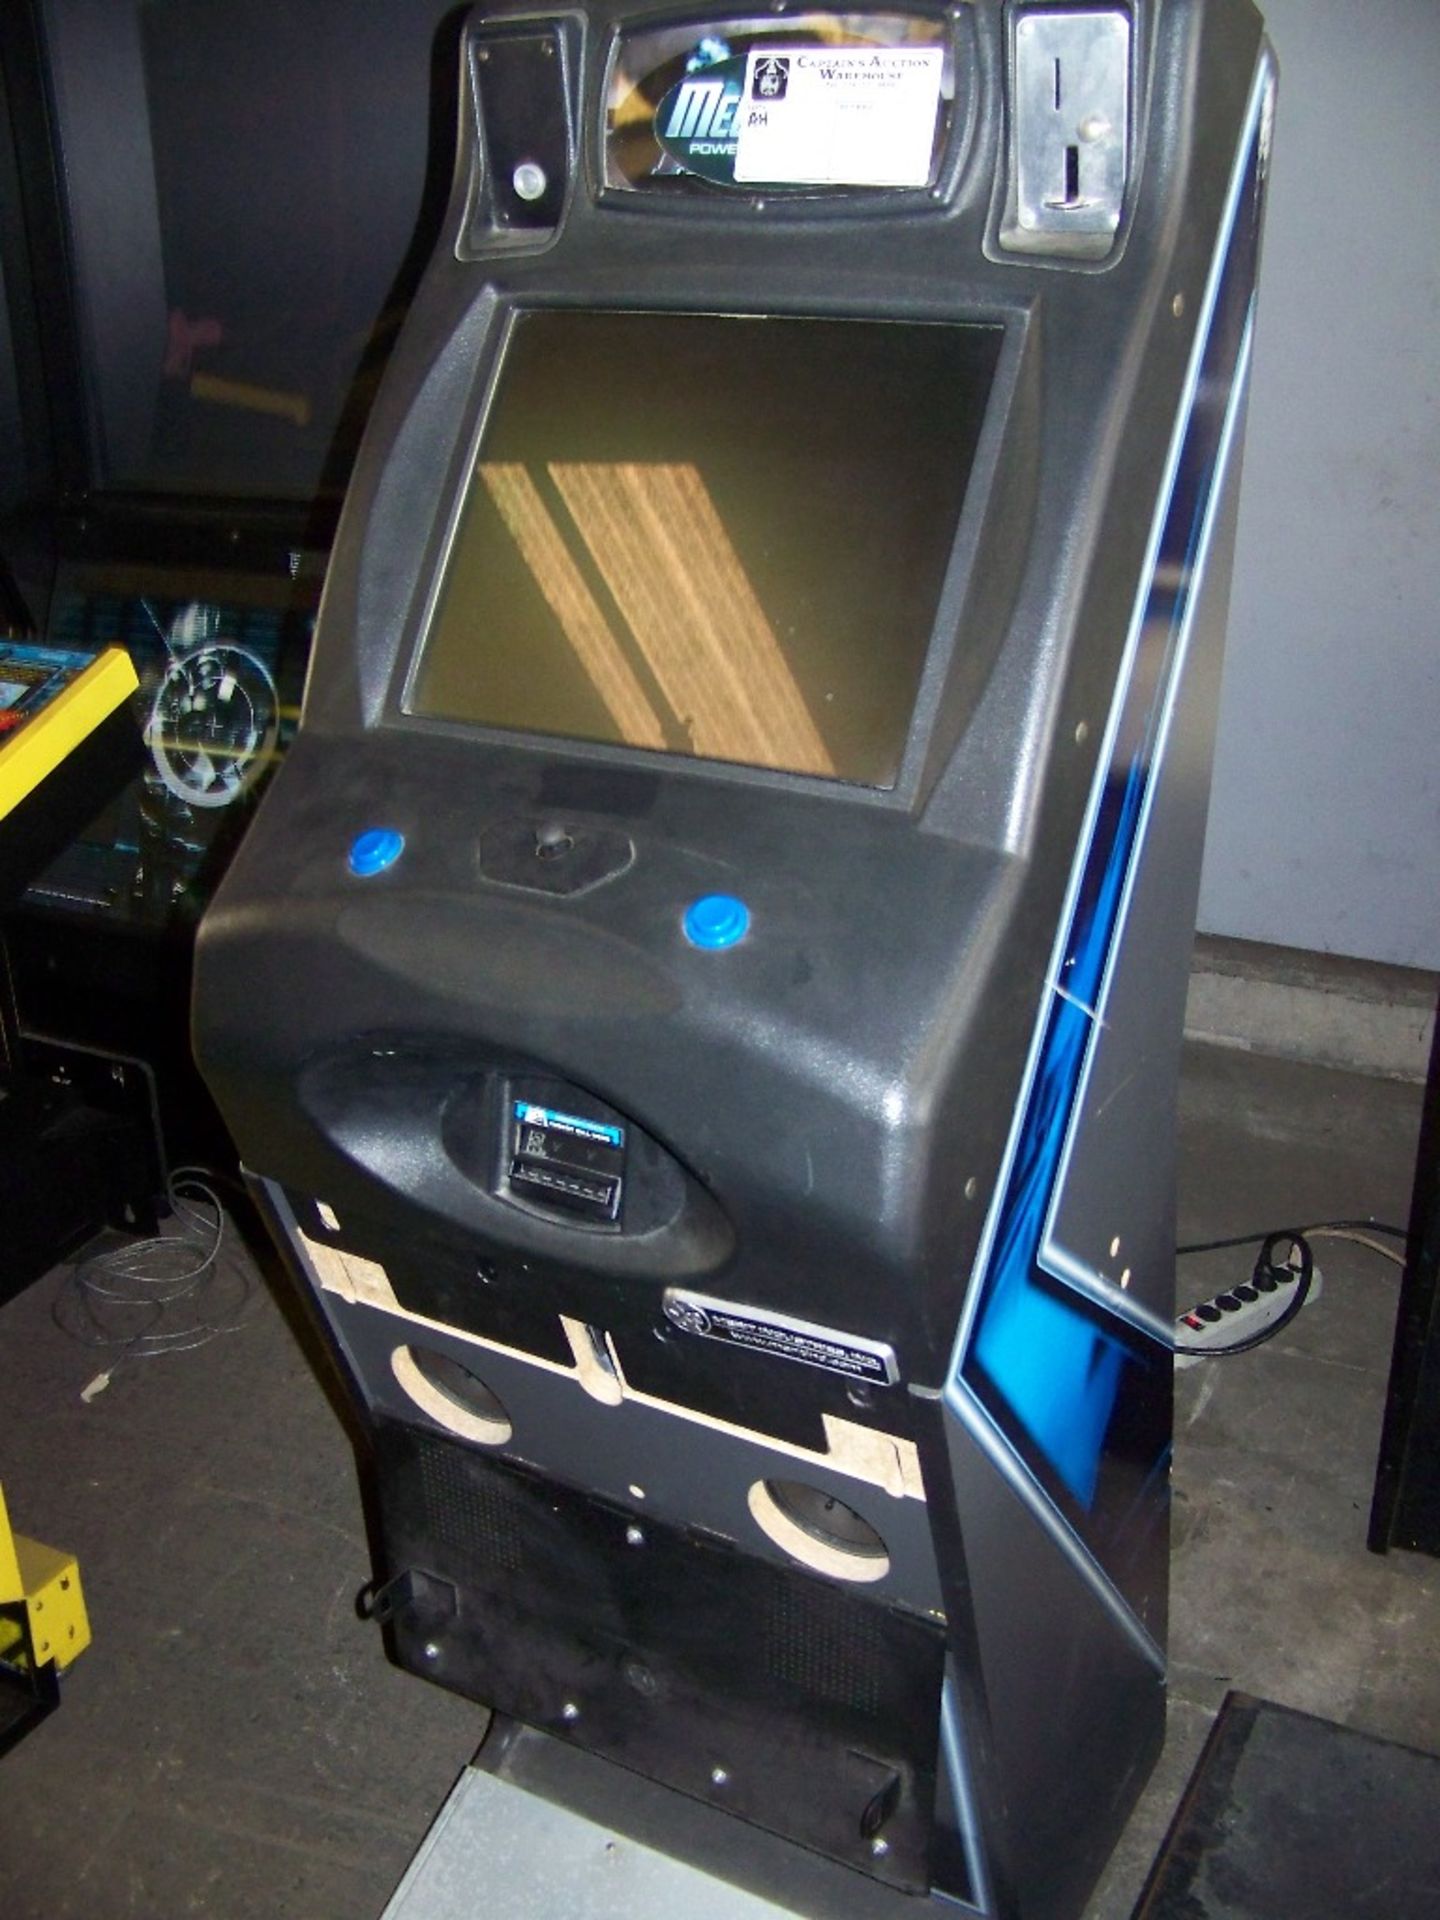 MEGATOUCH UPRIGHT TOUCHSCREEN ARCADE